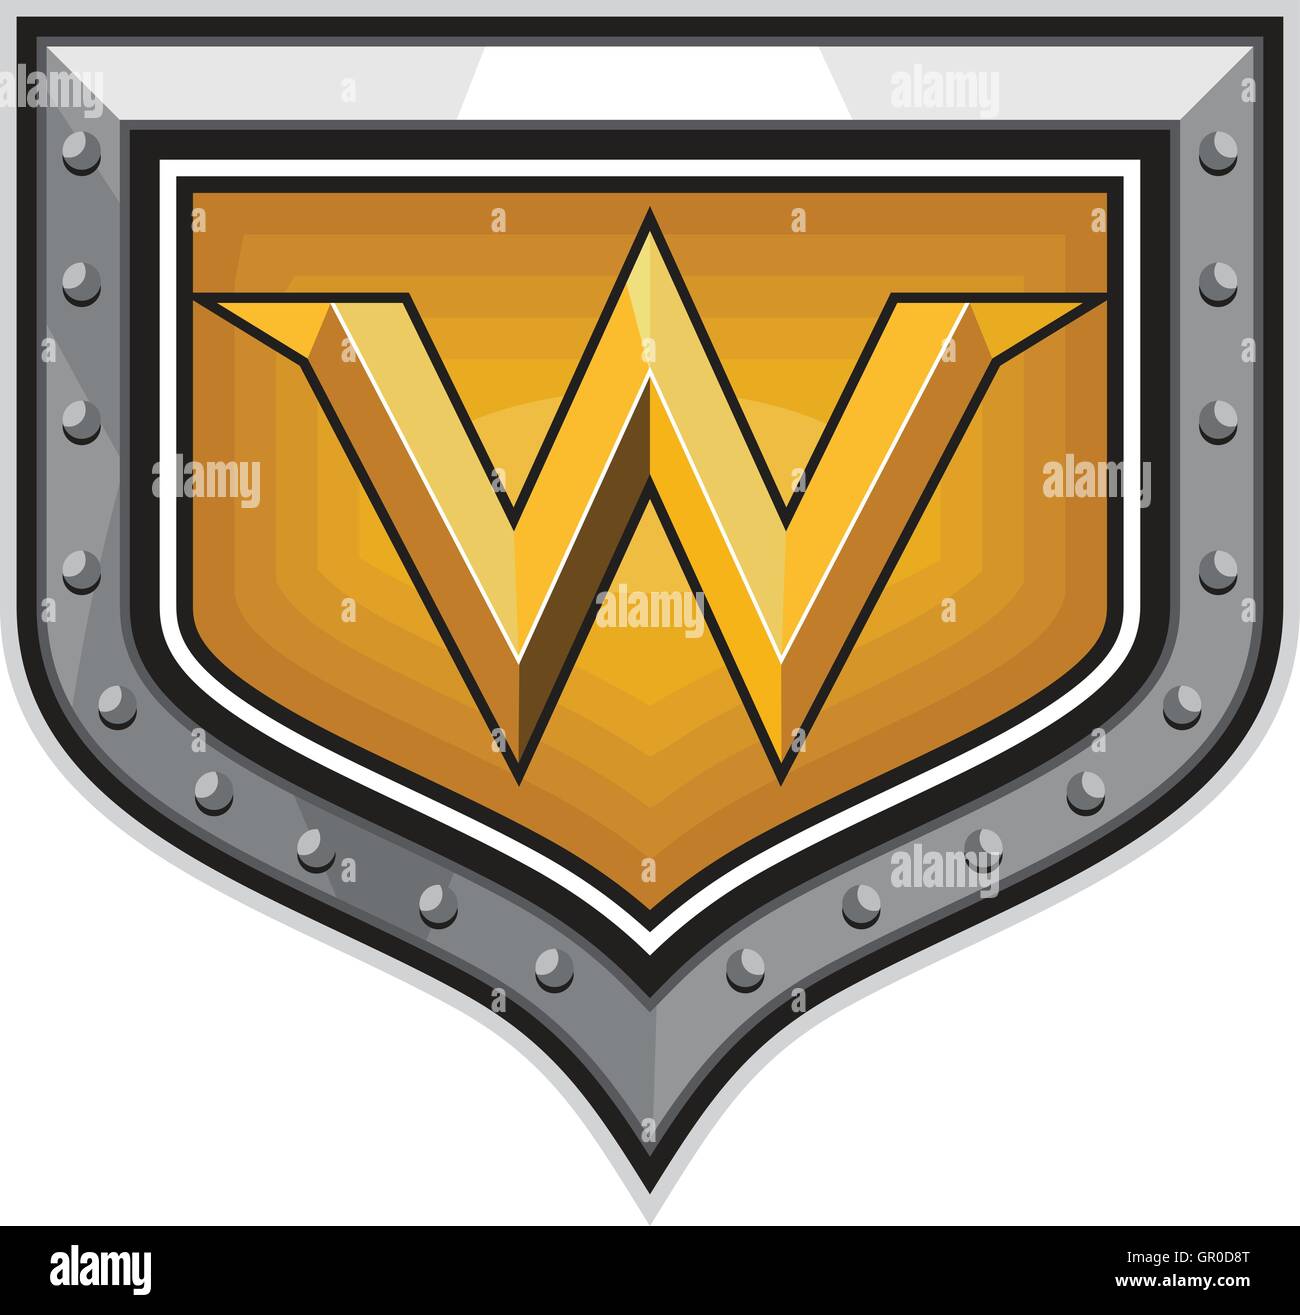 Illustration of the letter W in gold set inside shield crest done in retro style. Stock Vector